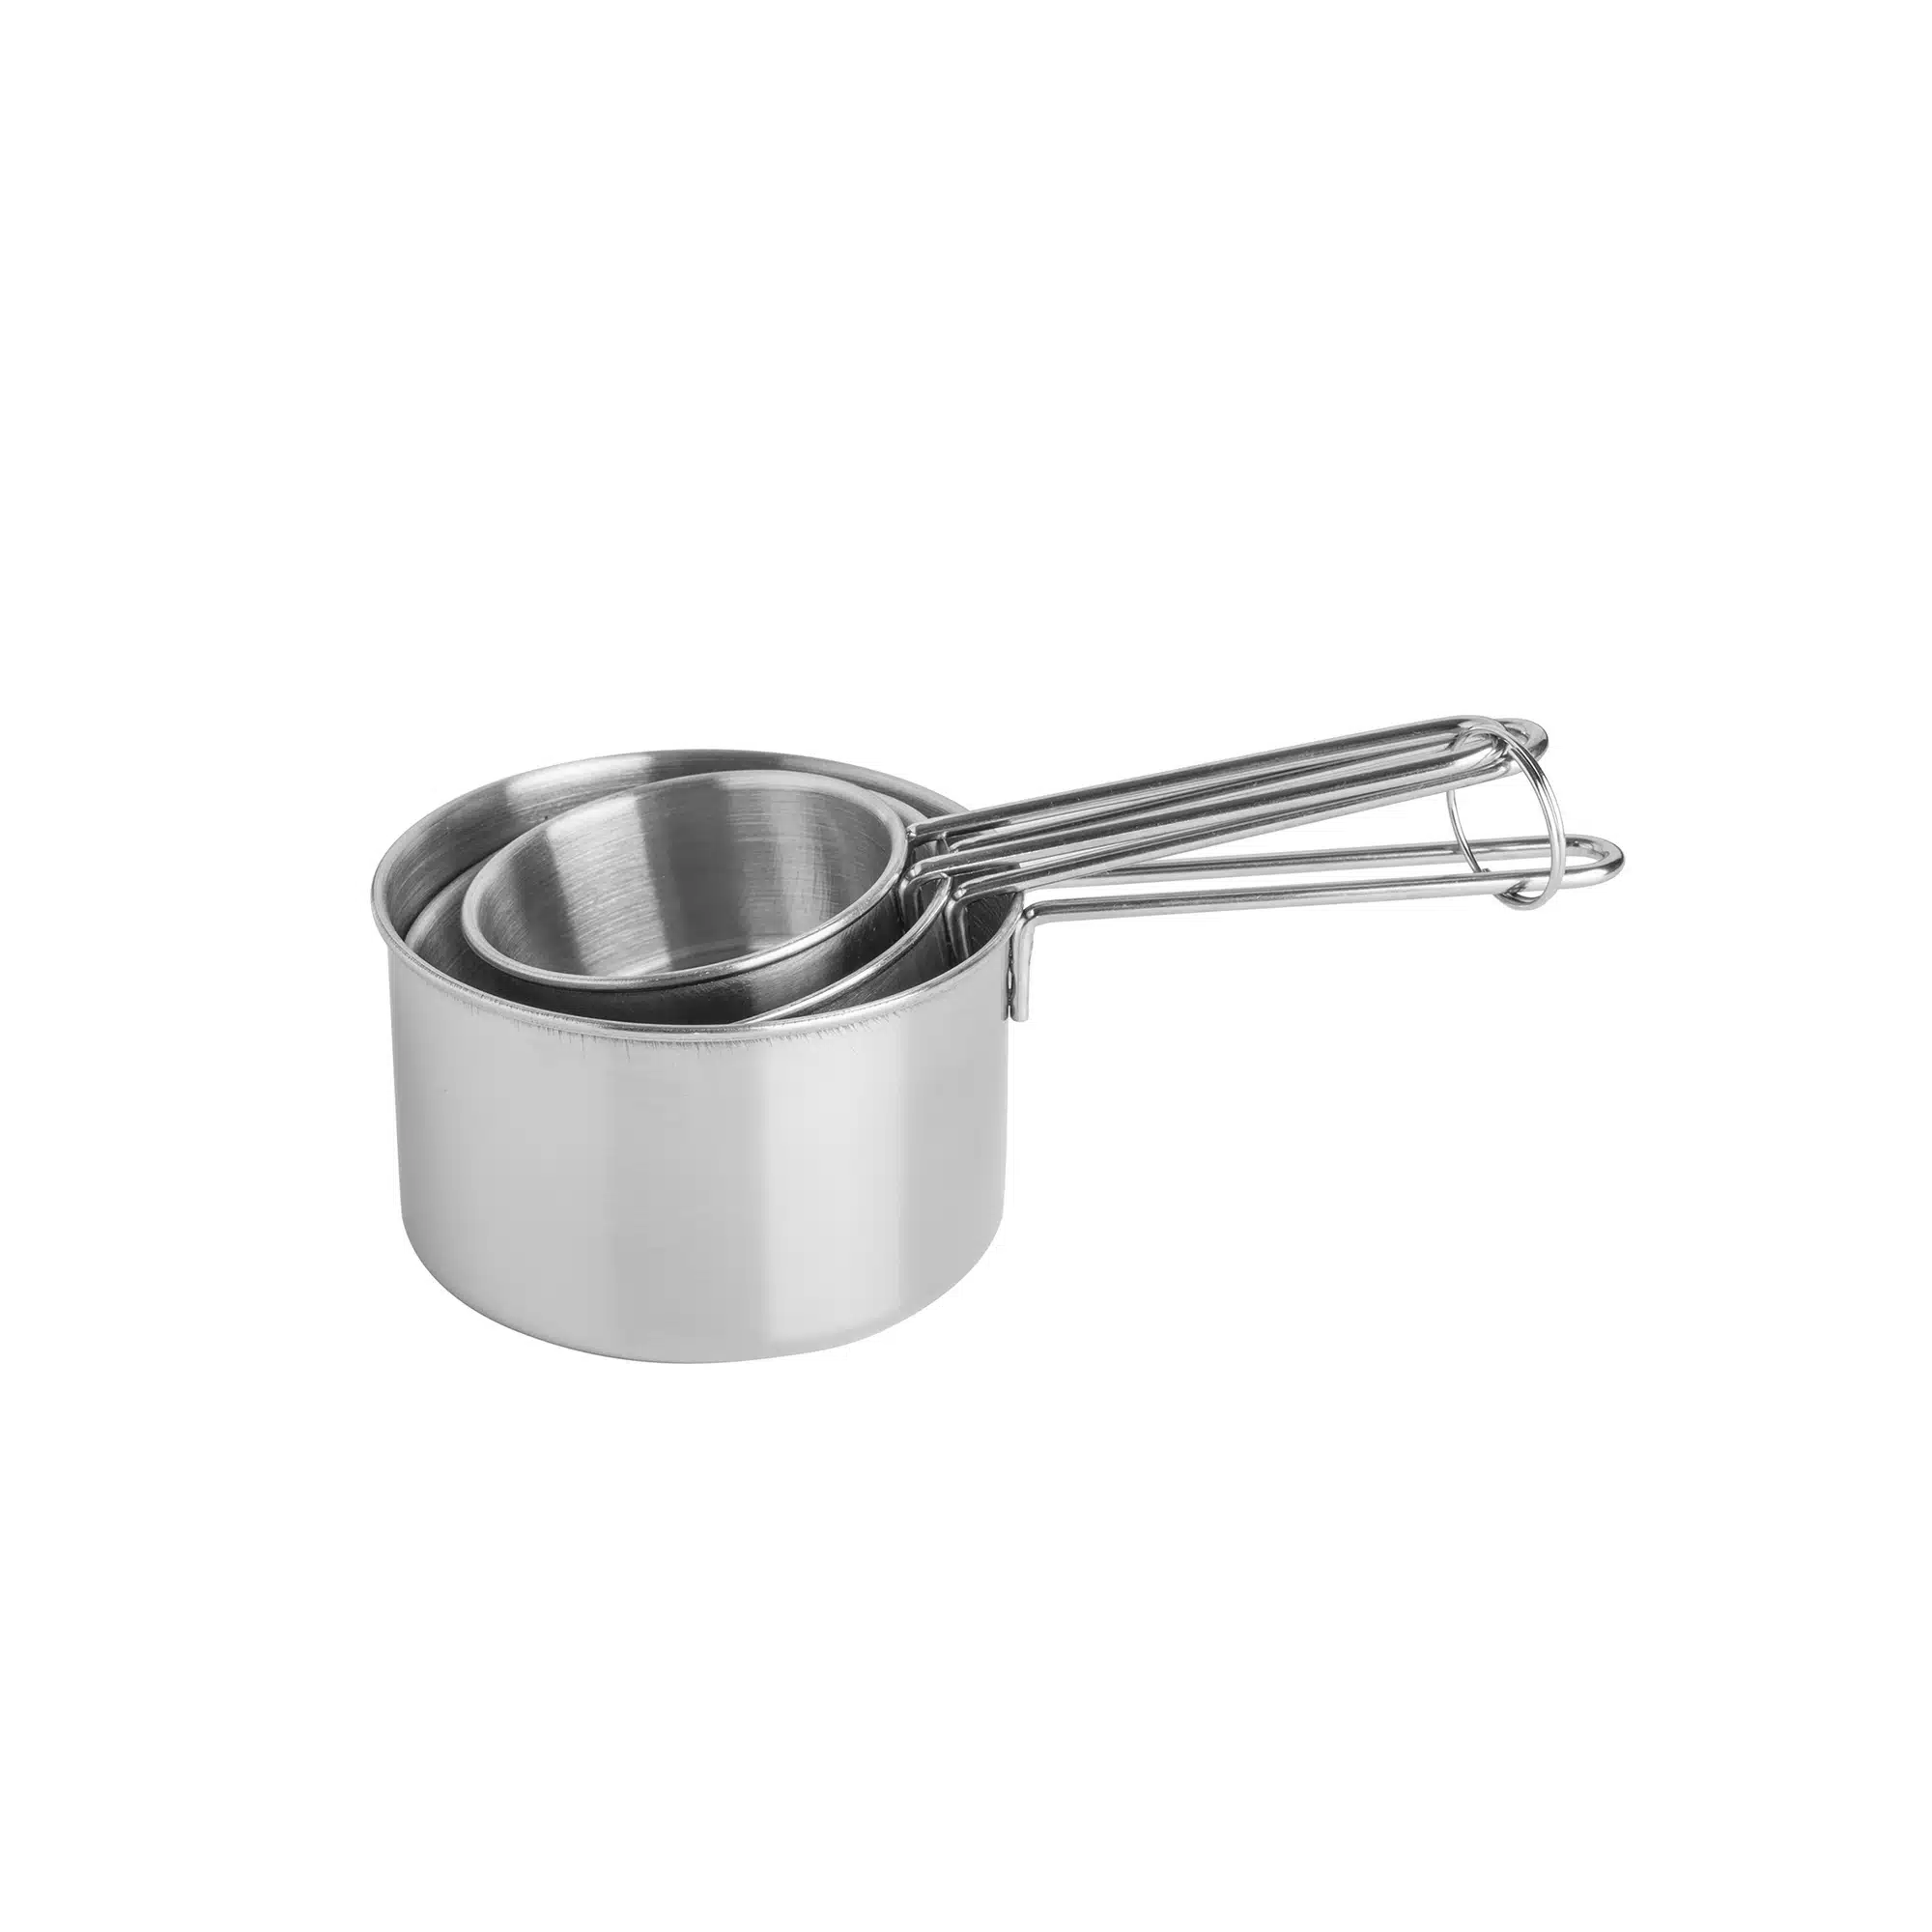 Mason Cash Measuring Cups Stainless Steel Set of 3